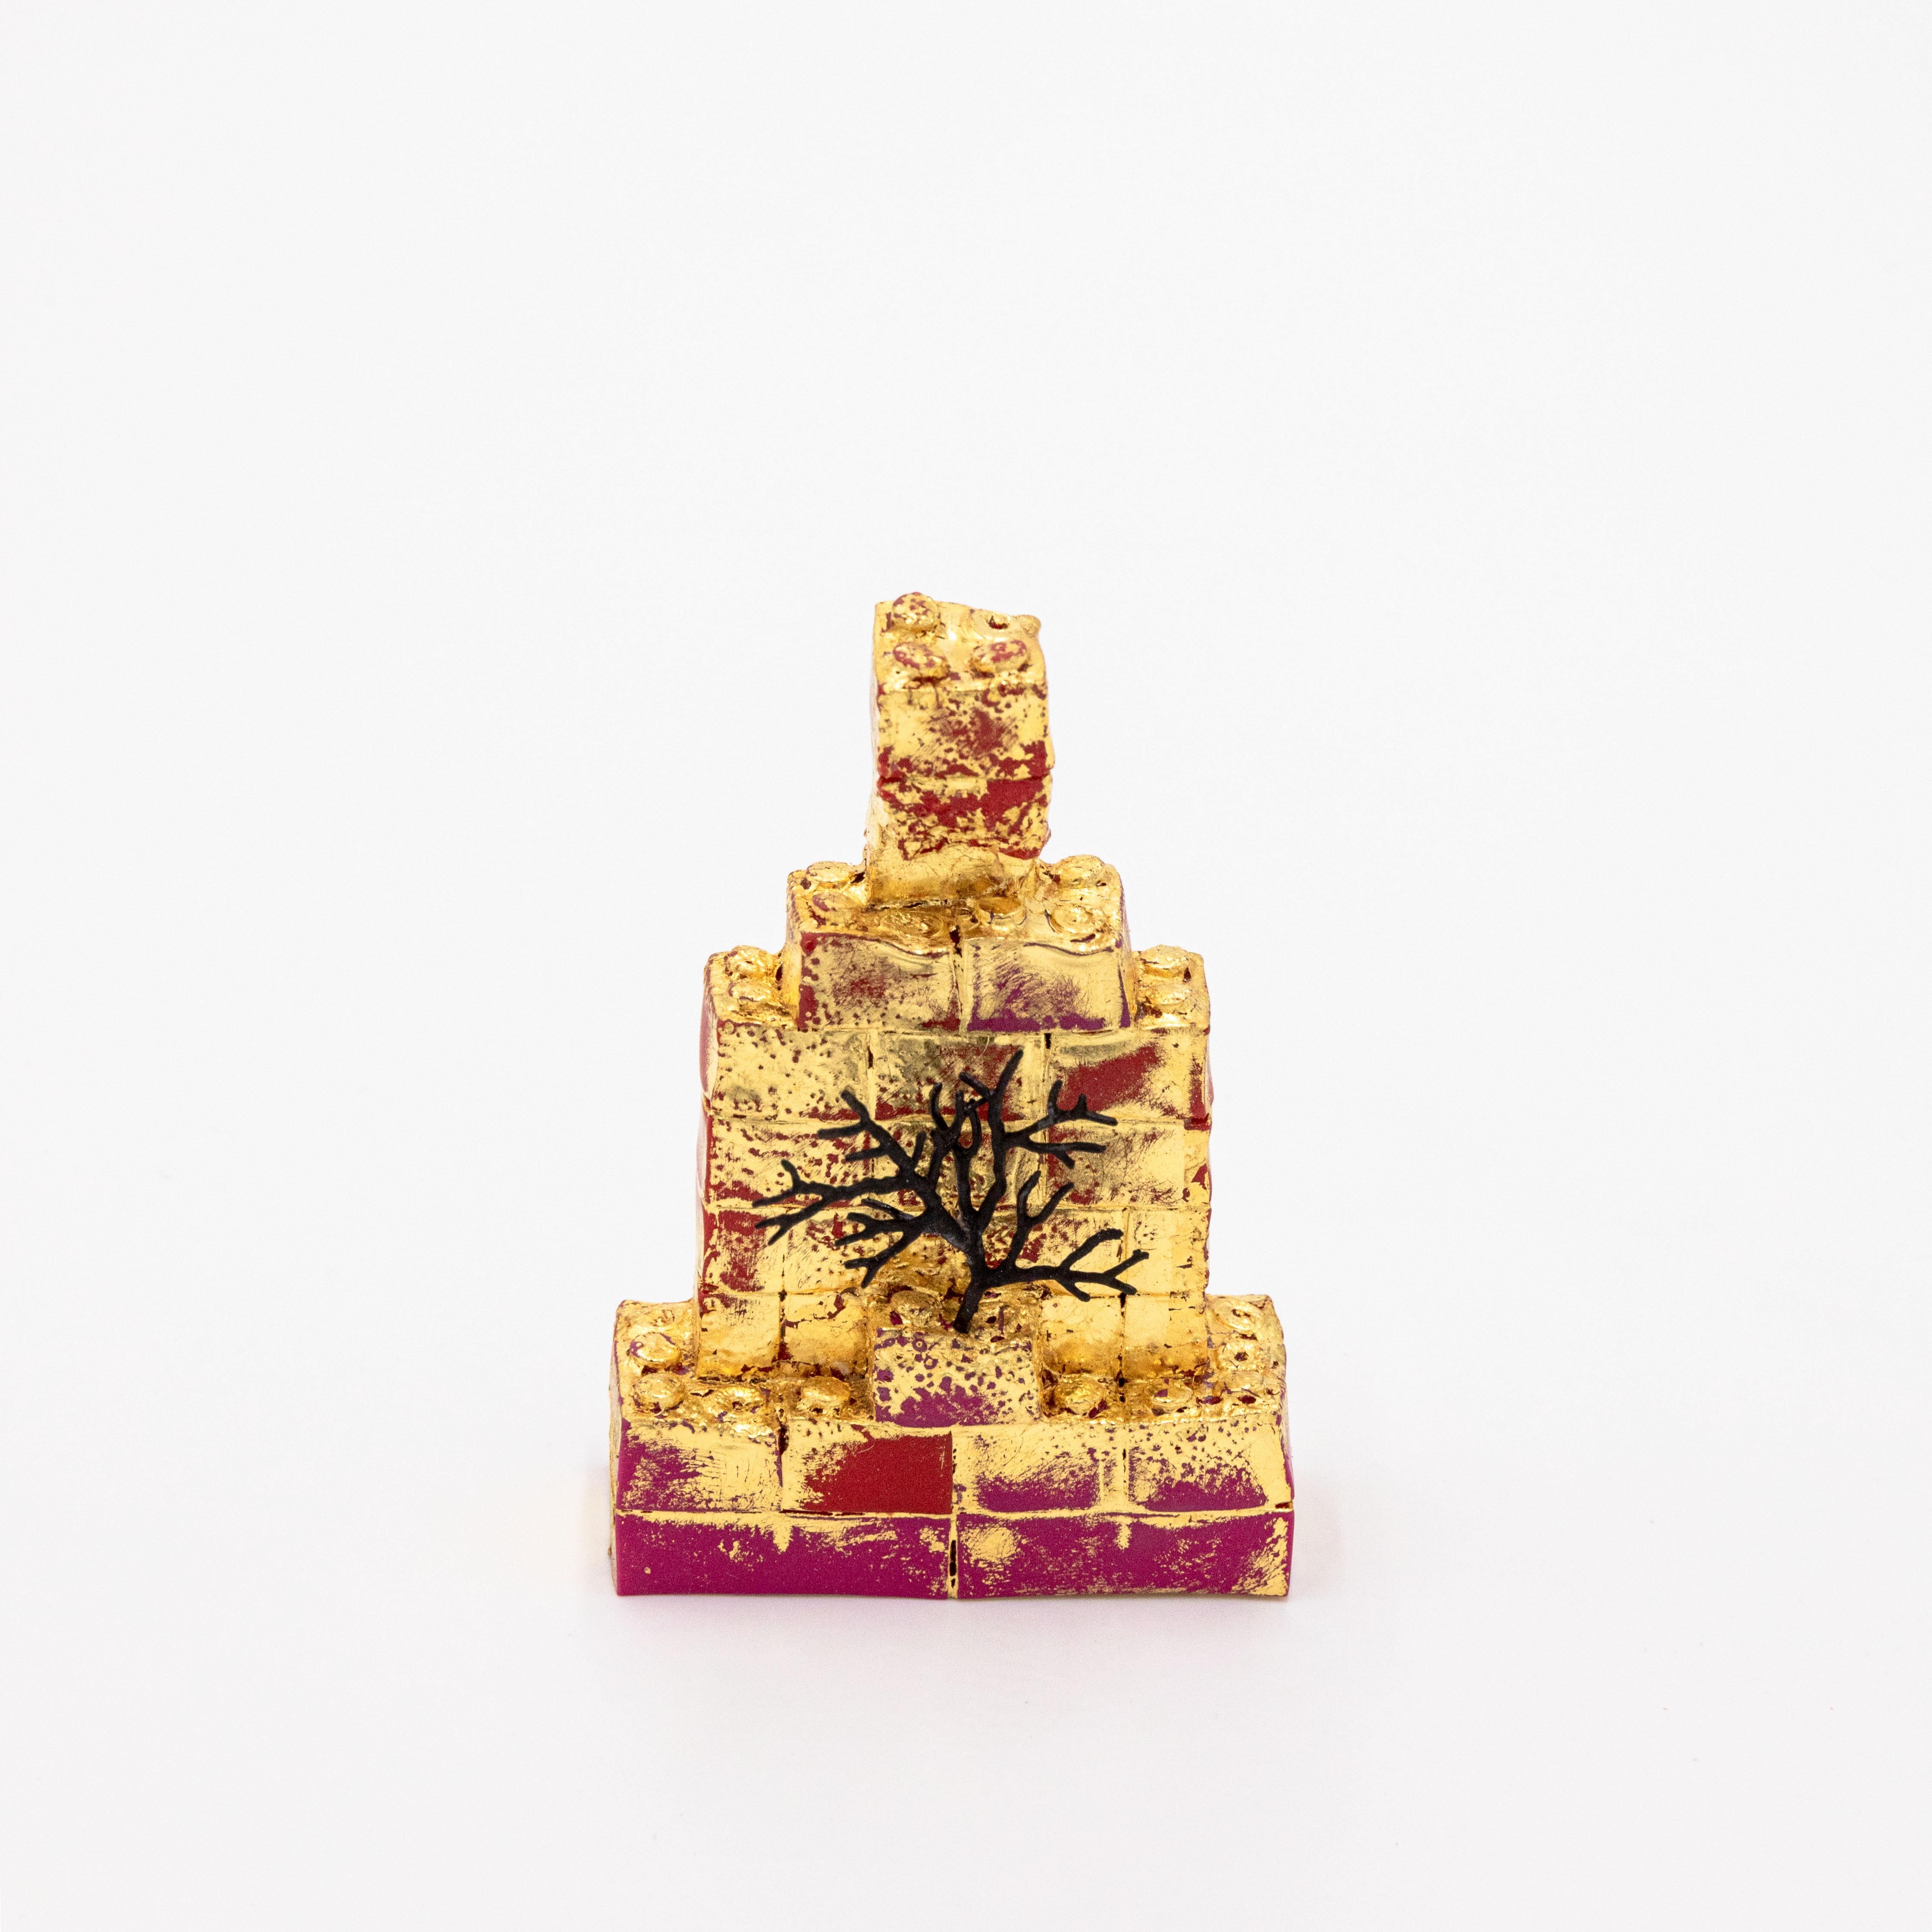 Lego, gold leaf, plastic model

This collaborative work, which began with a common interest in Buddhism, explored the idea of expressing the sacred within everyday life.

As artist and Zen monk Hasegawa says, “Buddhism teaches something that cannot